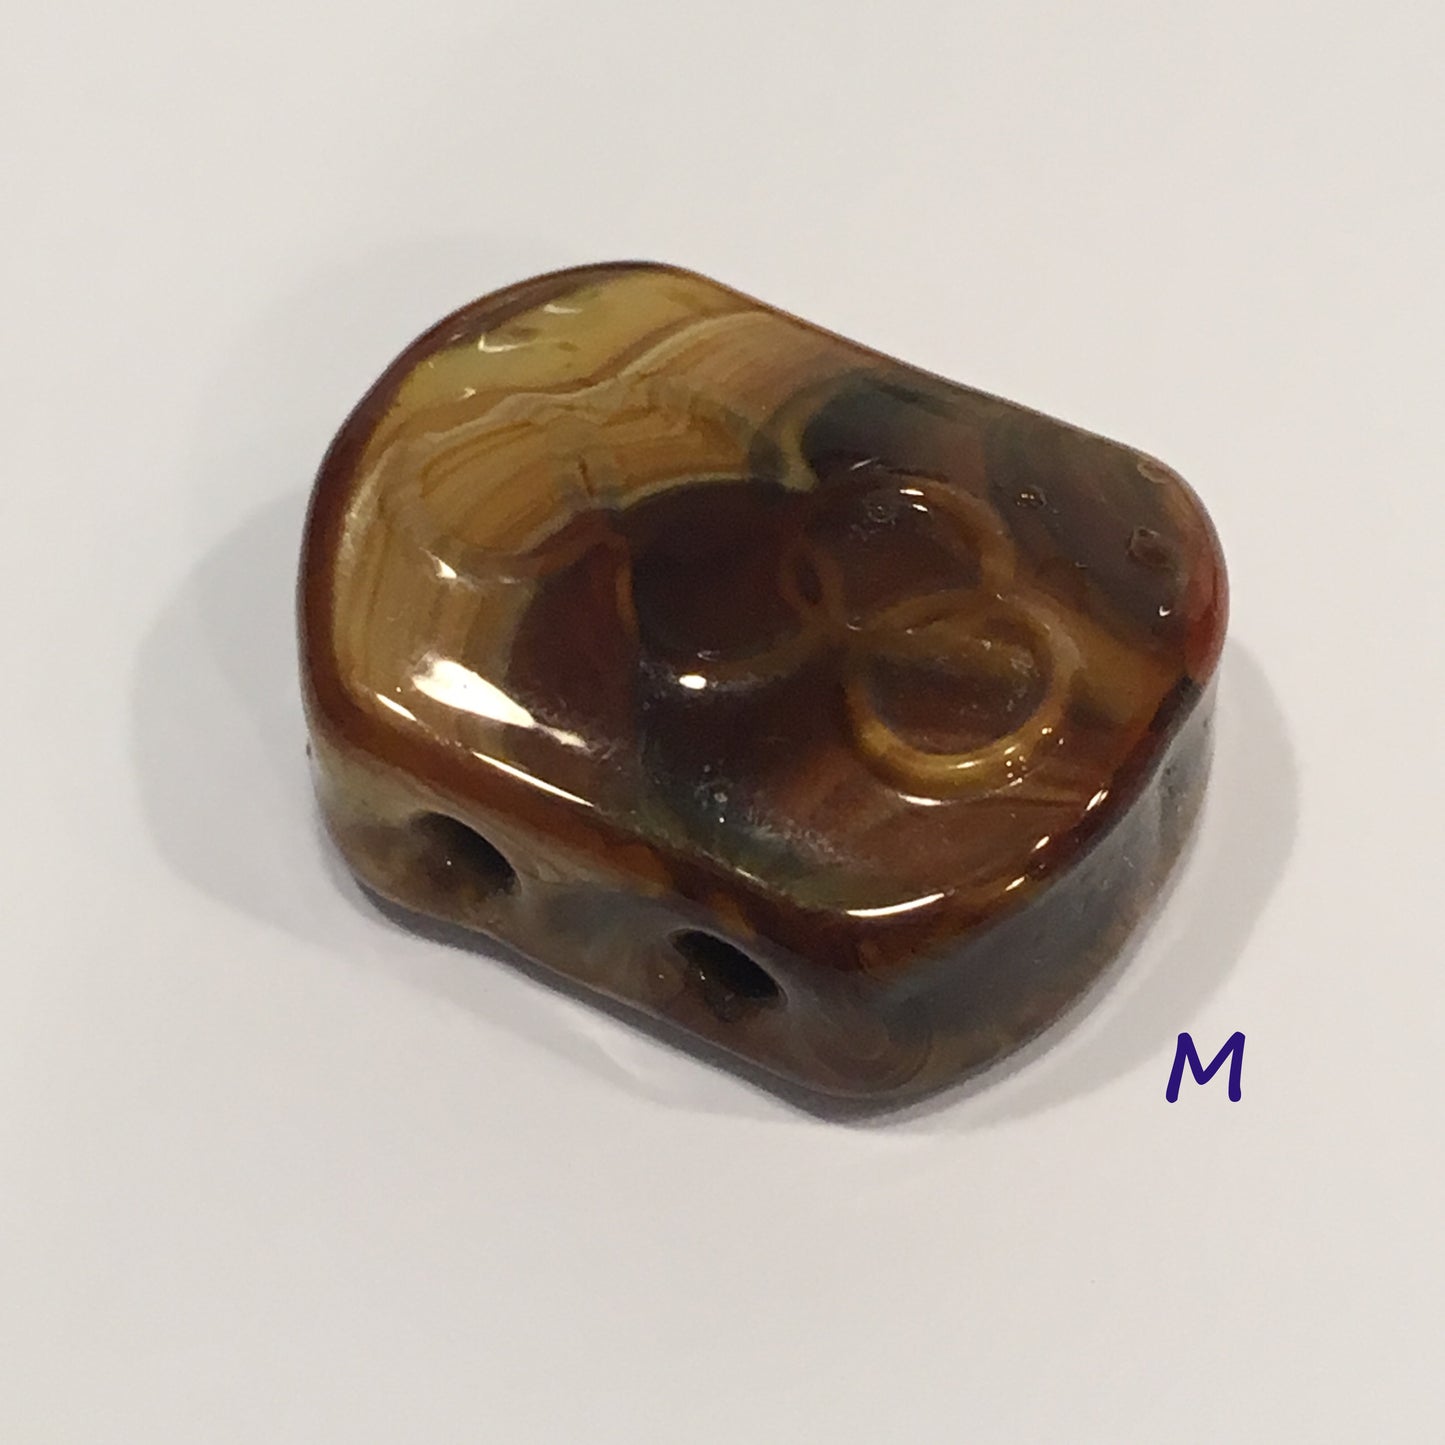 Glass Focal Bead, Two-Strand, 19 x 24 x 10 mm, Bead M